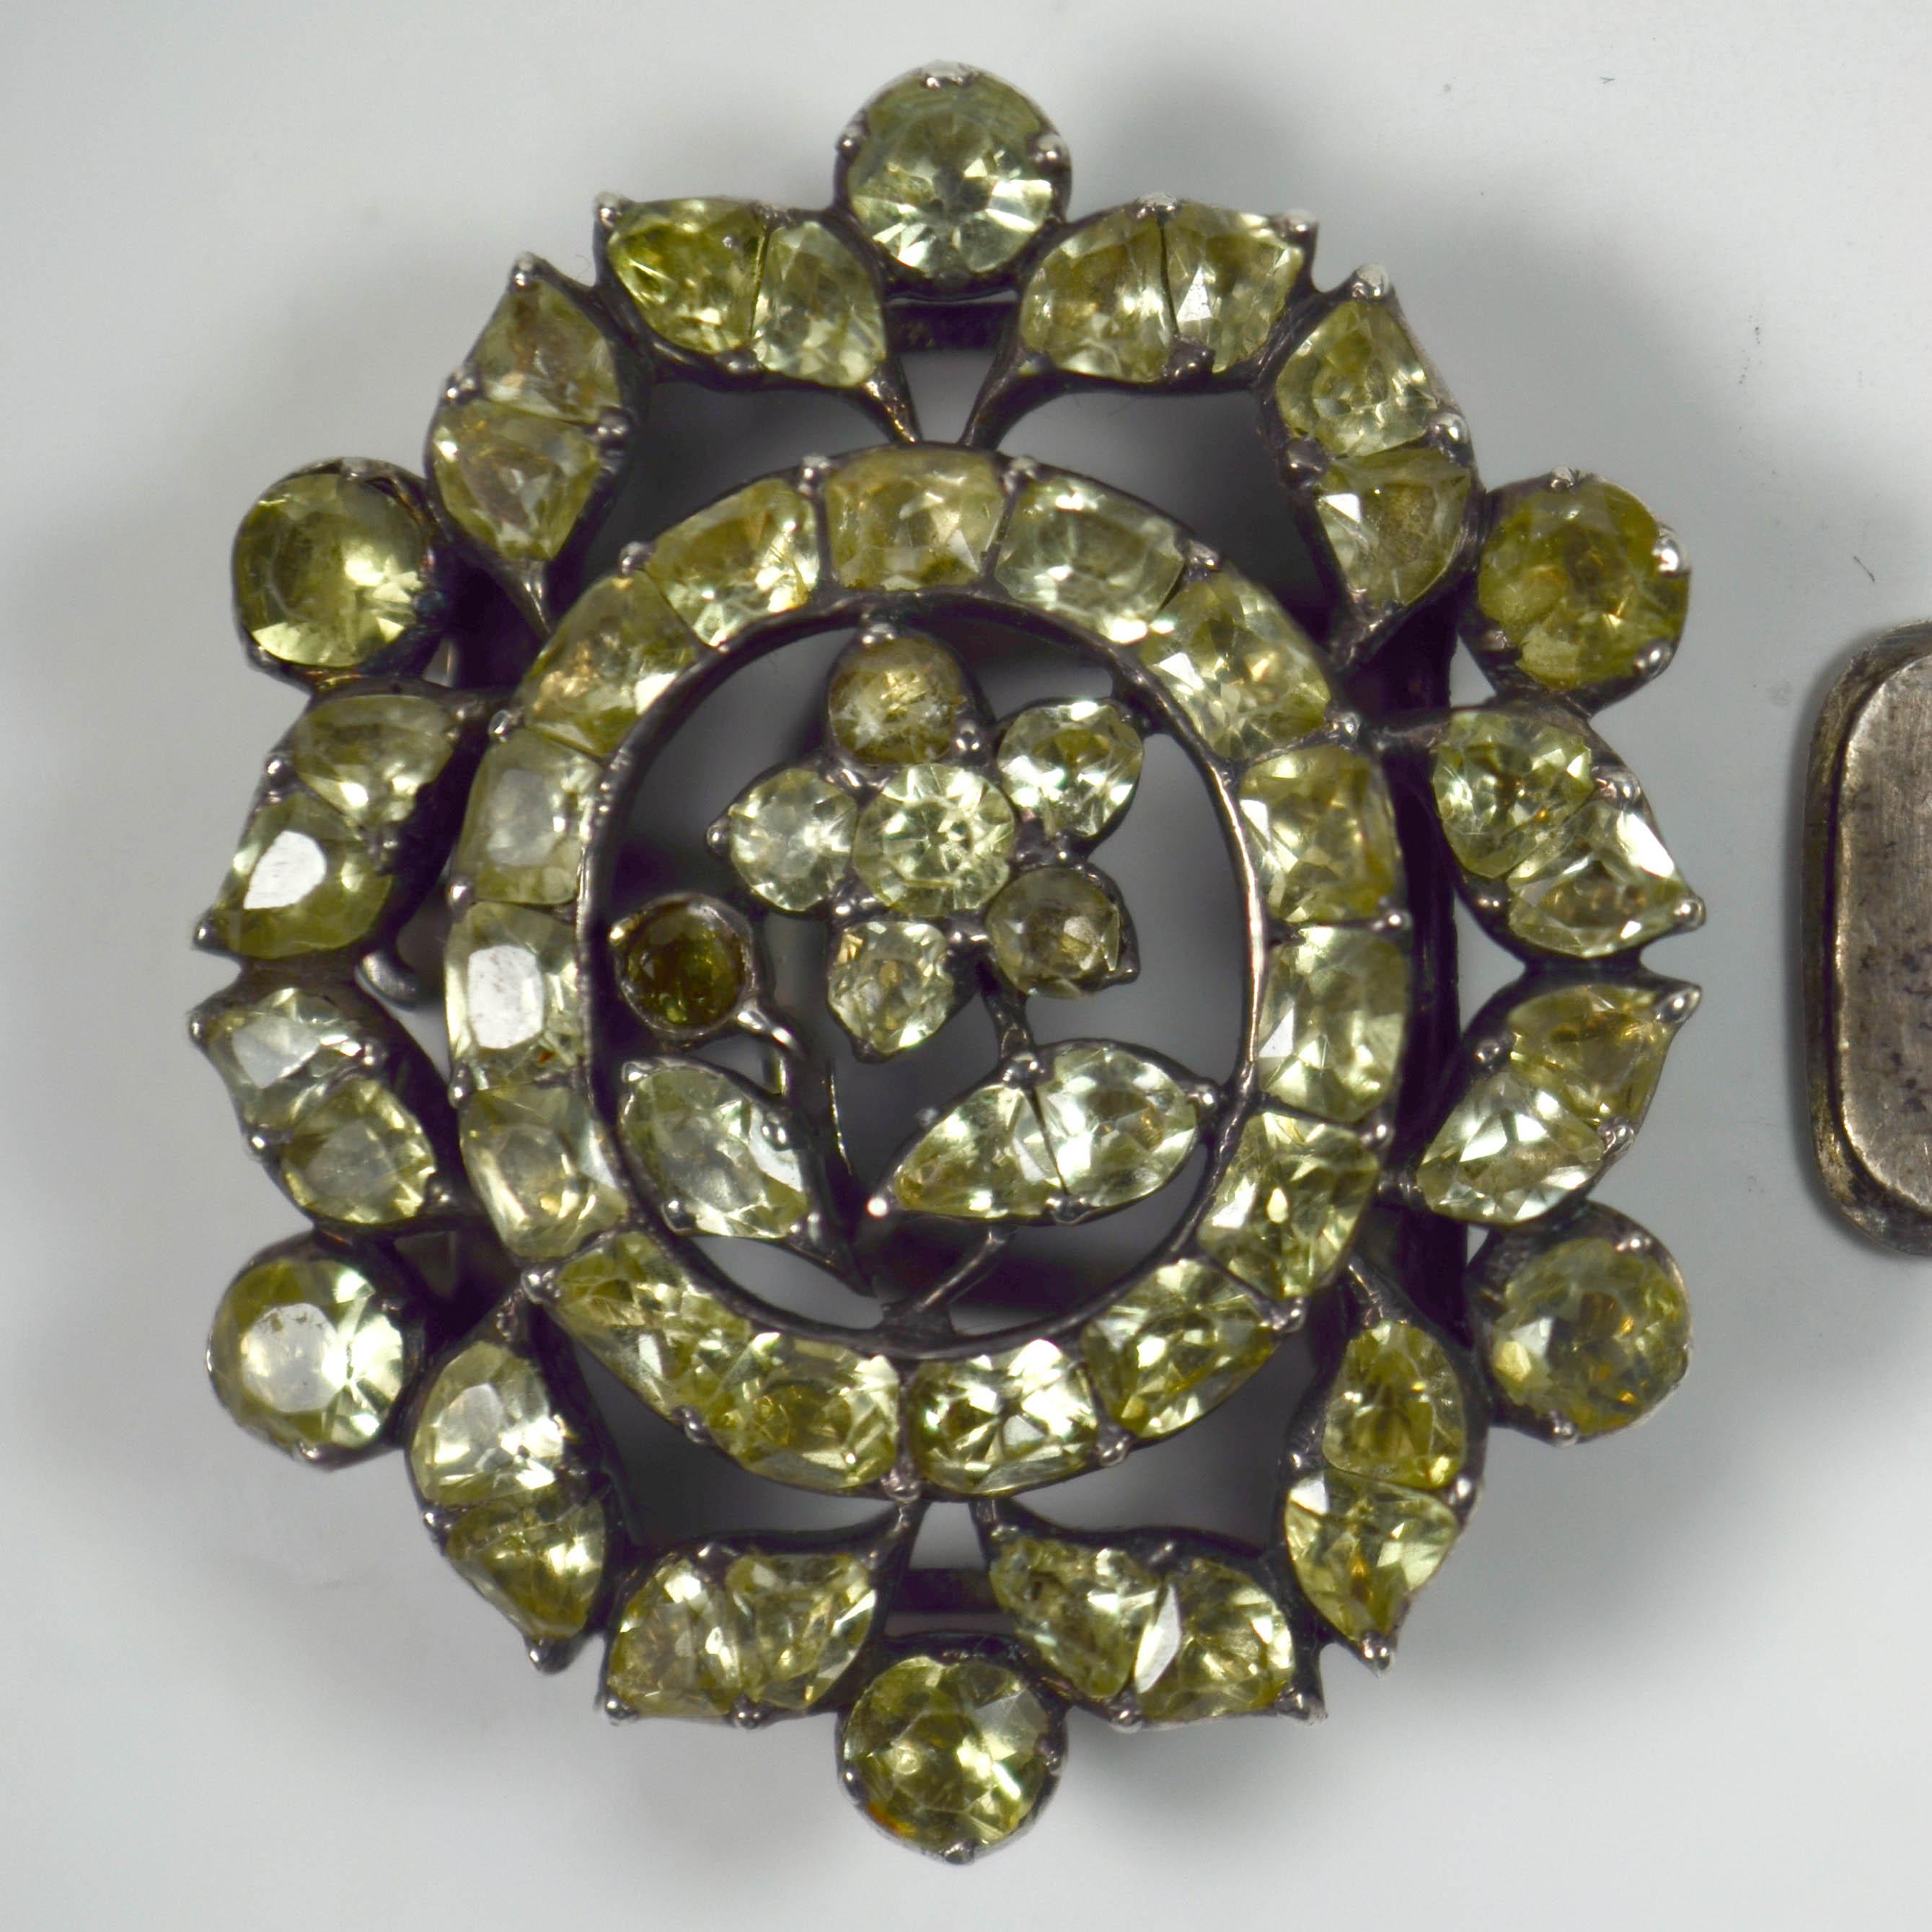 An antique clasp set with pale green chrysoberyl in a floral design mounted in silver. Portuguese c.1750. 

The 57 chrysoberyl foil-backed stones are original to the piece, and are in good condition showing very little wear. No discolouration to